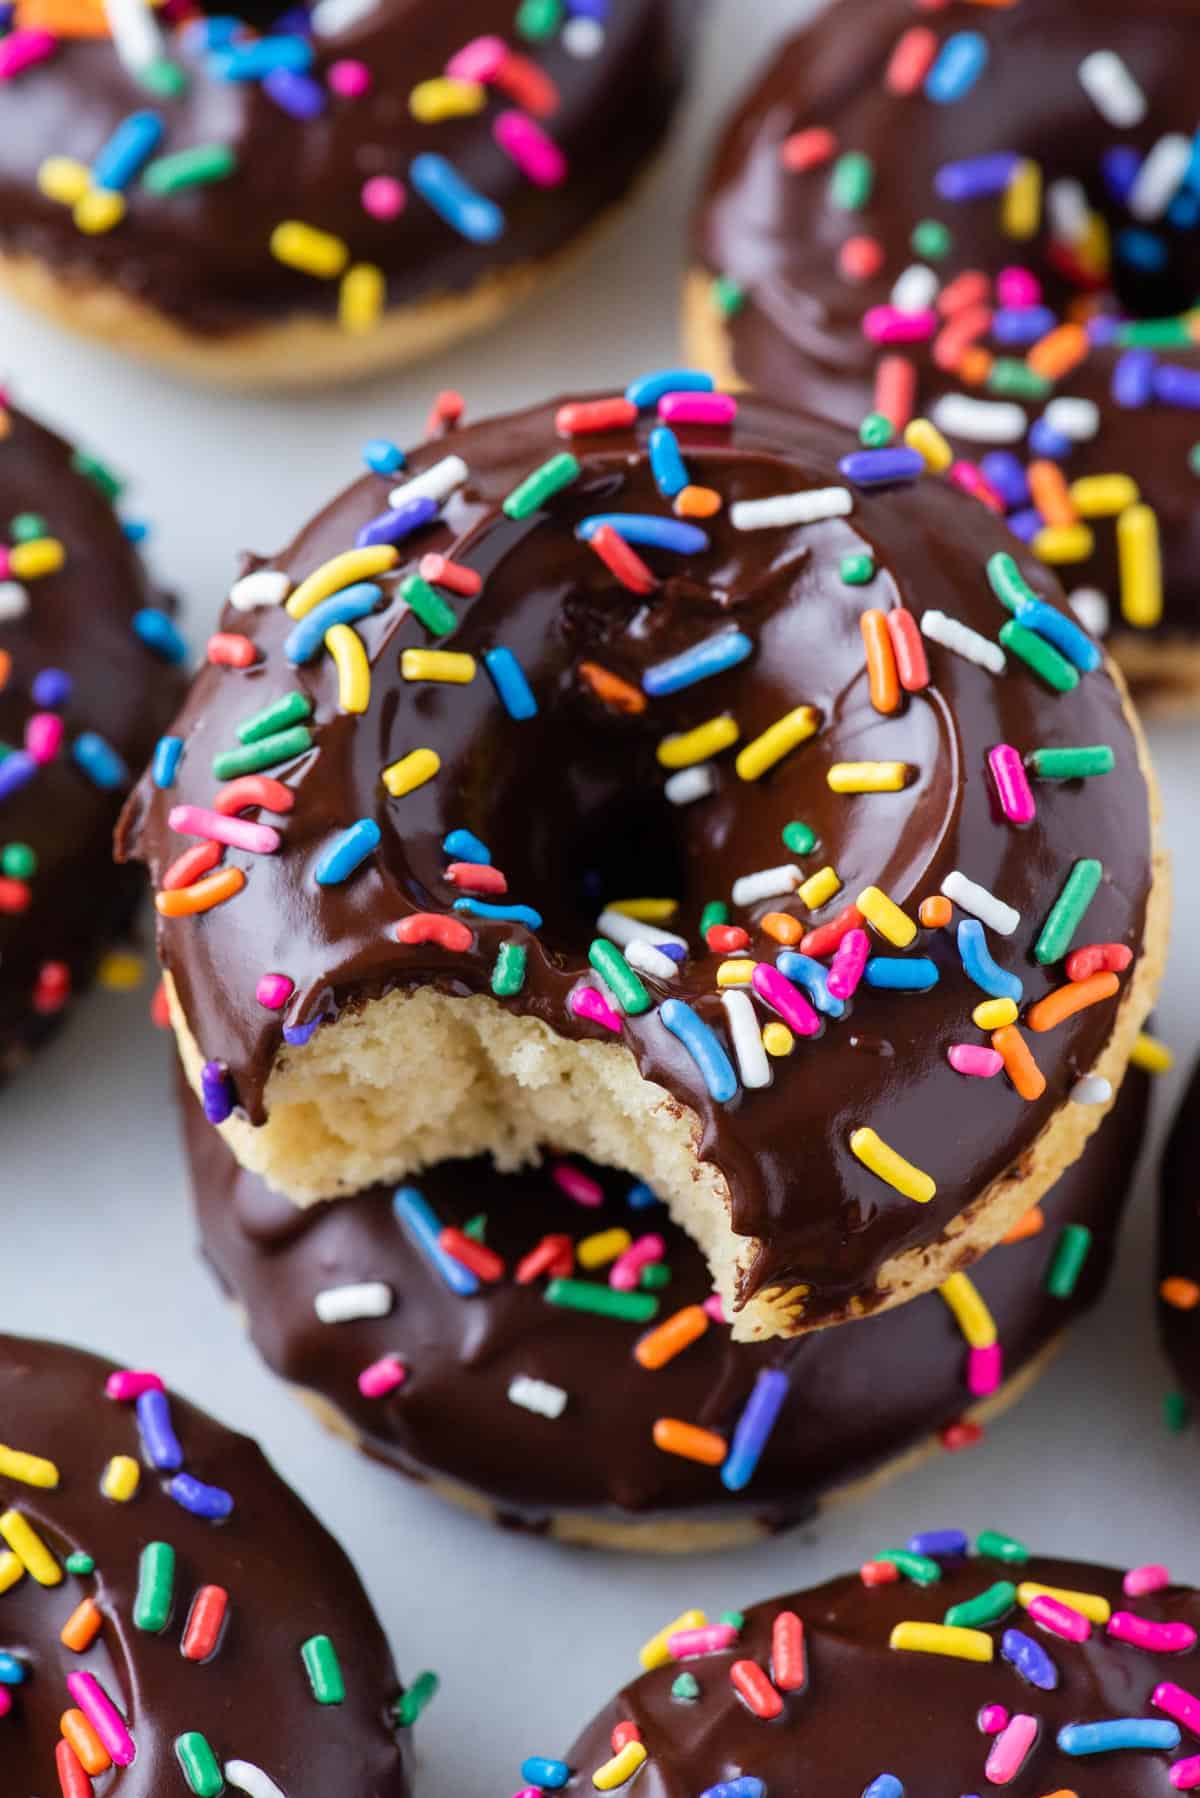 donut dipped in chocolate glaze with rainbow sprinkles